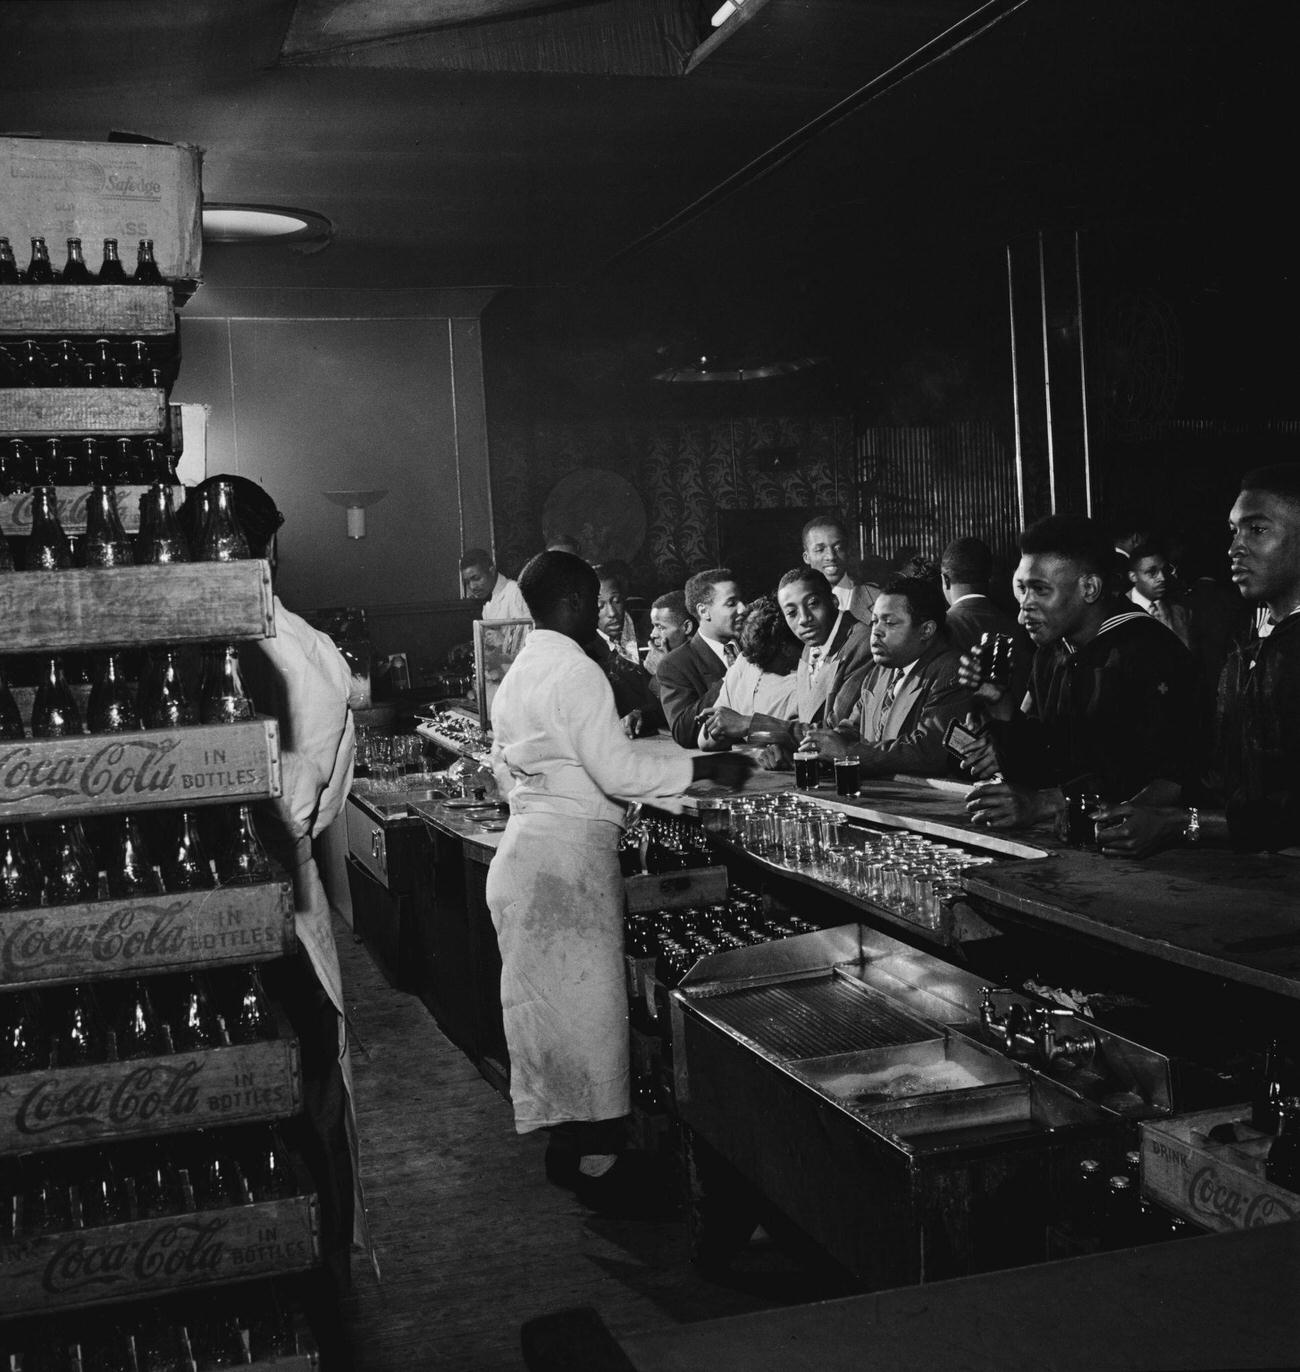 Coca-Cola crates stacked behind a bar with white-coated bartenders, location unspecified, circa 1950.